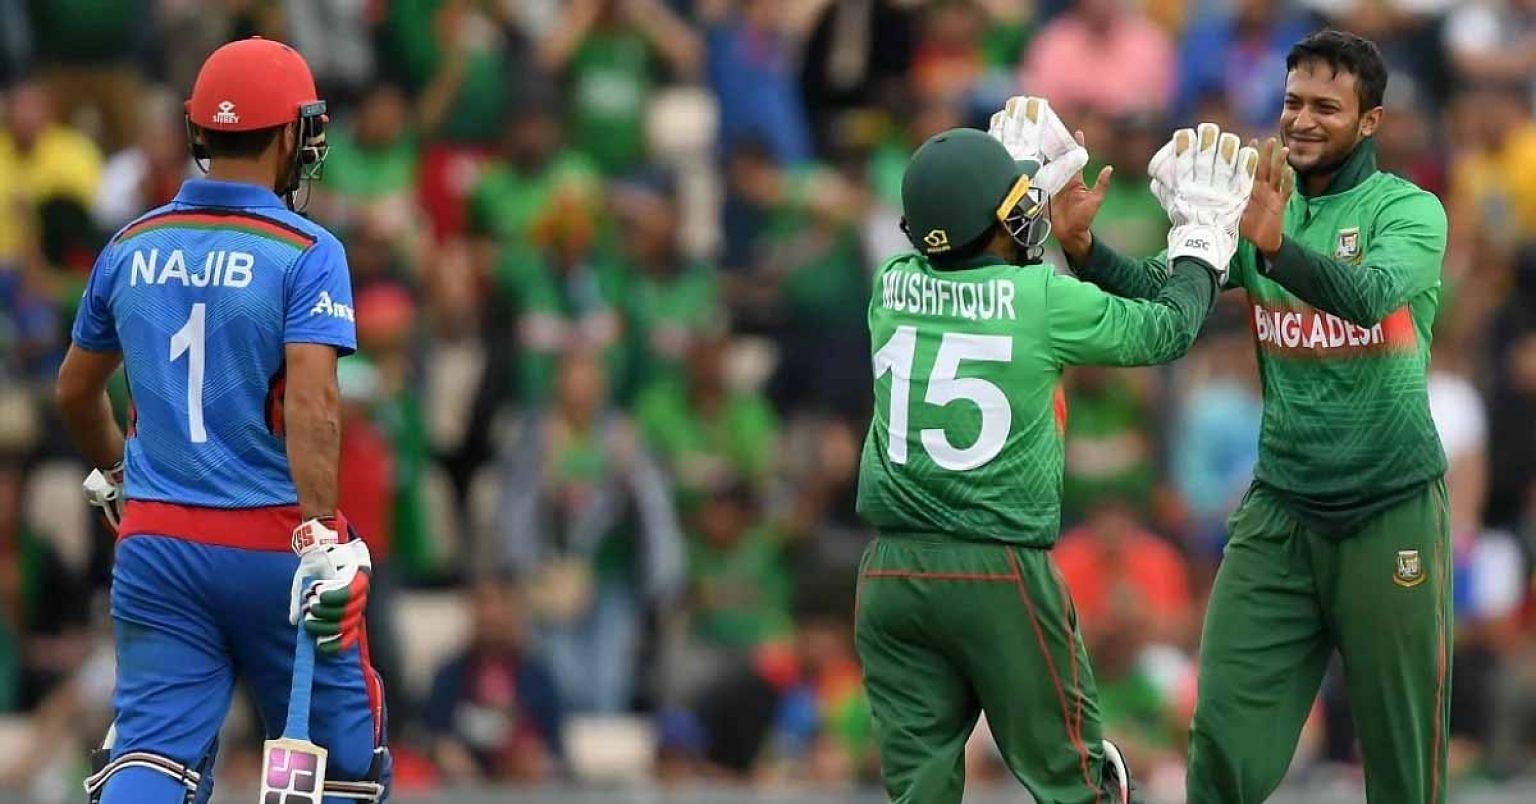 Afghanistan lead Bangladesh 4-2 in the shortest format. 